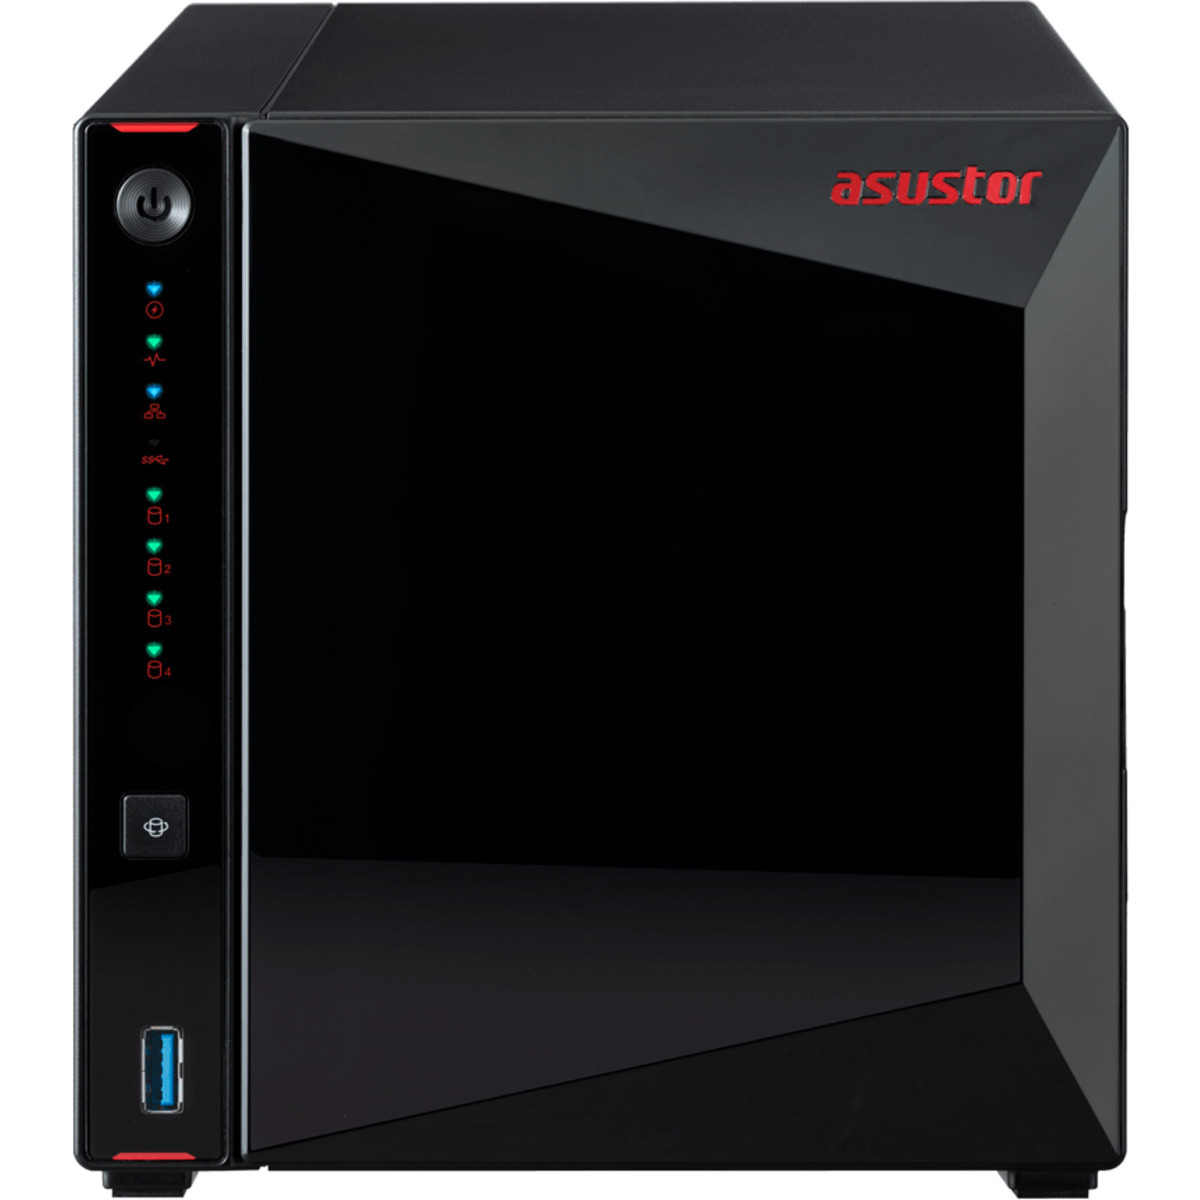 ASUSTOR AS5304T Nimbustor 48tb 4-Bay Desktop Multimedia / Power User / Business NAS - Network Attached Storage Device 3x16tb Seagate EXOS X18 ST16000NM000J 3.5 7200rpm SATA 6Gb/s HDD ENTERPRISE Class Drives Installed - Burn-In Tested - FREE RAM UPGRADE AS5304T Nimbustor